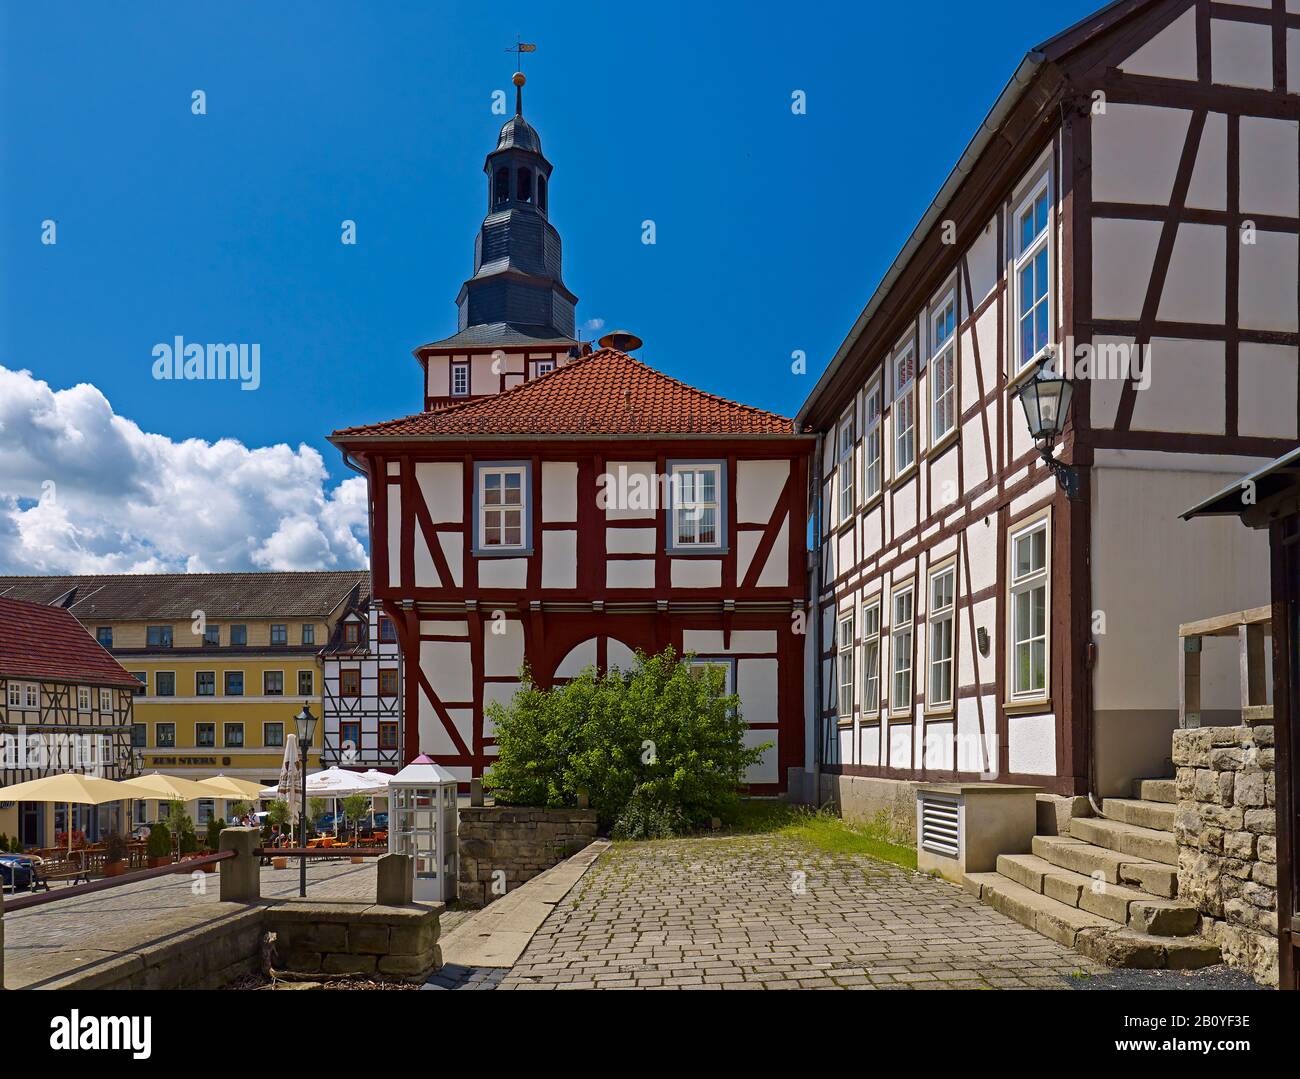 At the market with town hall in the half-timbered town Treffurt, Werratal, Wartburgkreis, Thuringia, Germany, Stock Photo